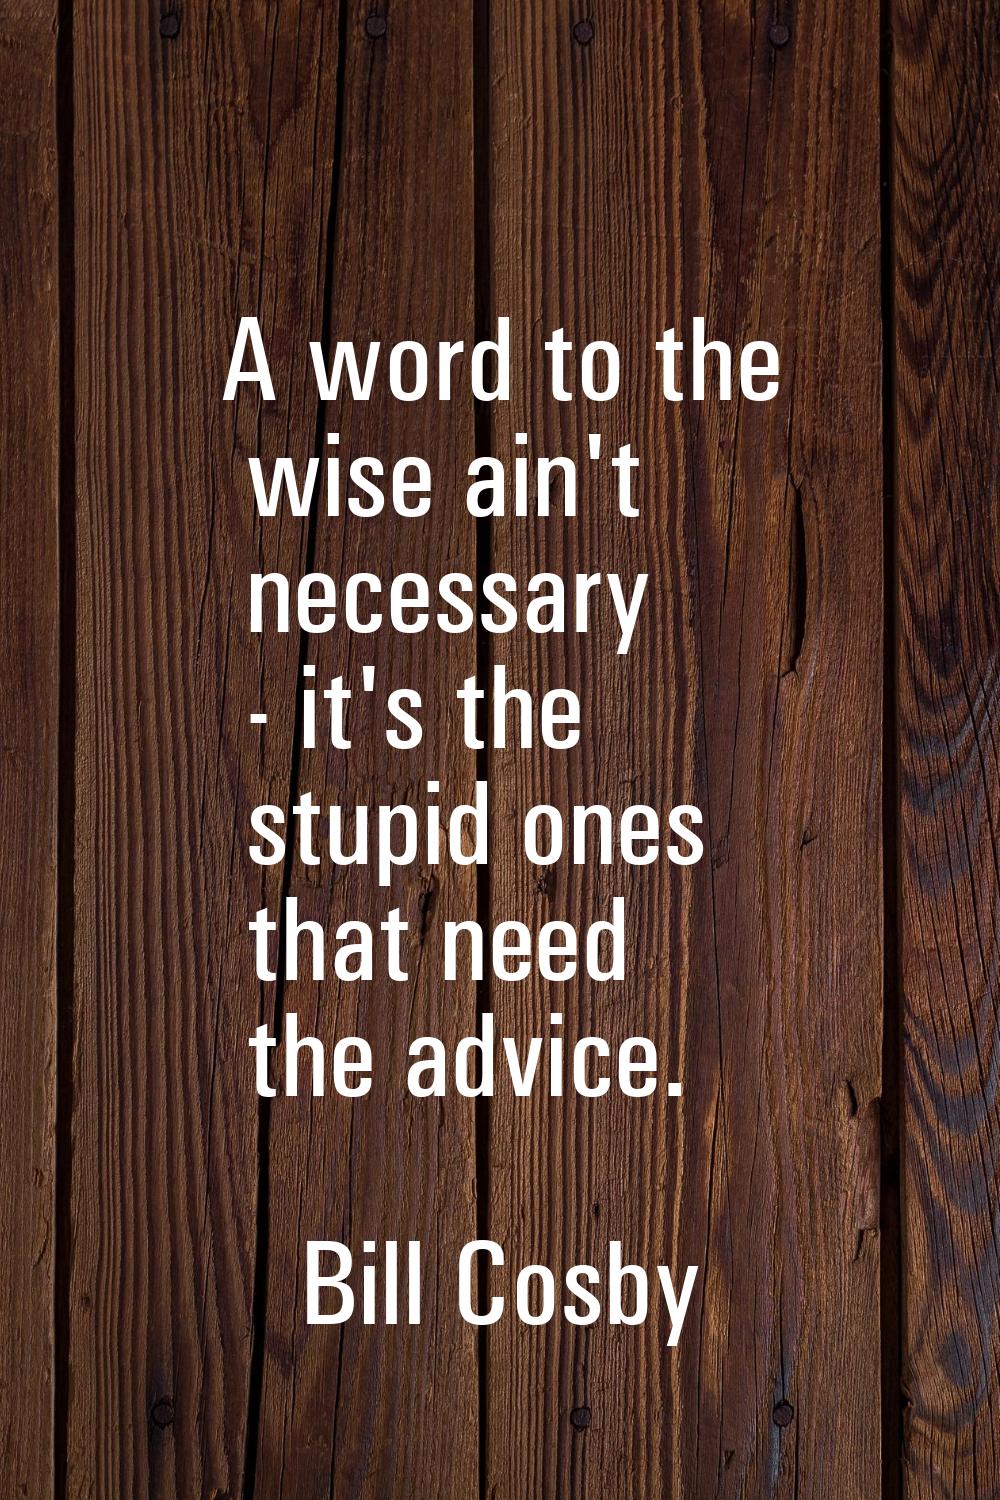 A word to the wise ain't necessary - it's the stupid ones that need the advice.